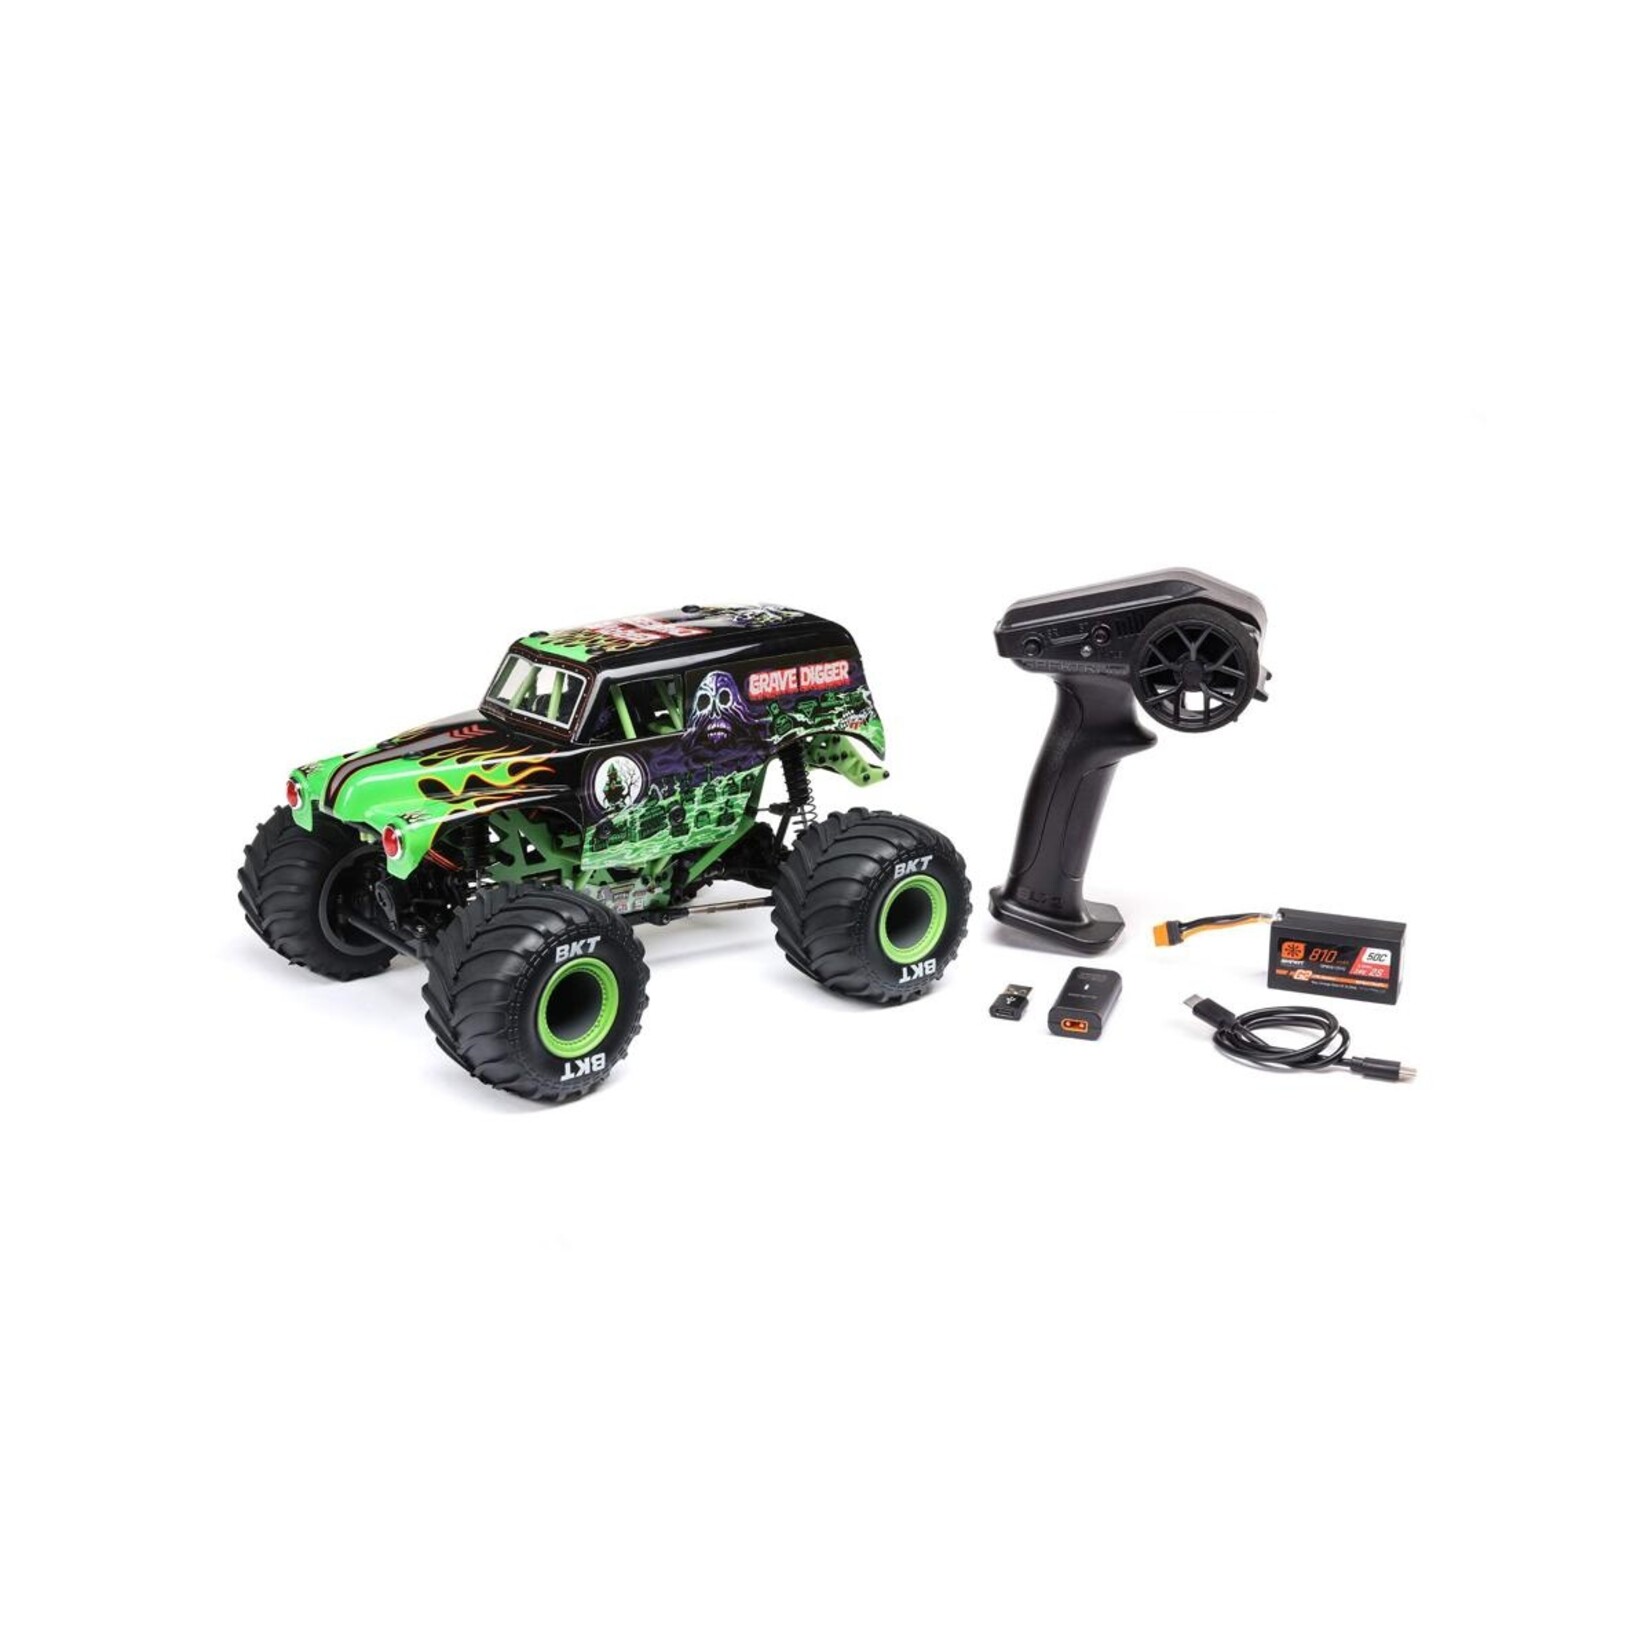 Losi Losi 1/18 Mini LMT 4X4 Brushed RTR Monster Truck (Grave Digger) w/SLT2 2.4GHz Radio, Battery & Charger #LOS01026T1